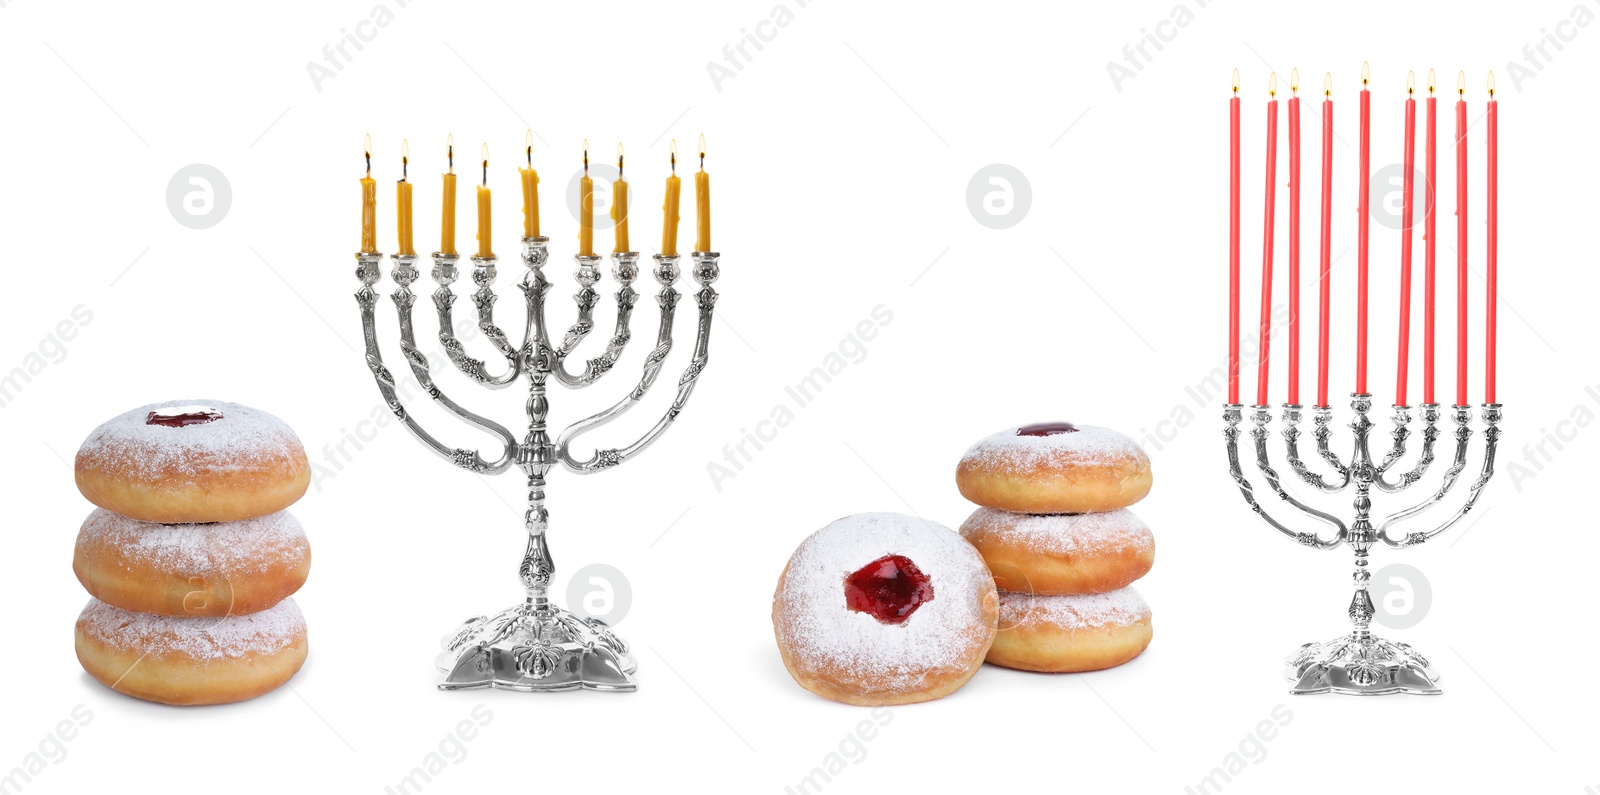 Image of Hanukkah doughnuts and silver menorahs on white background, collage. Banner design